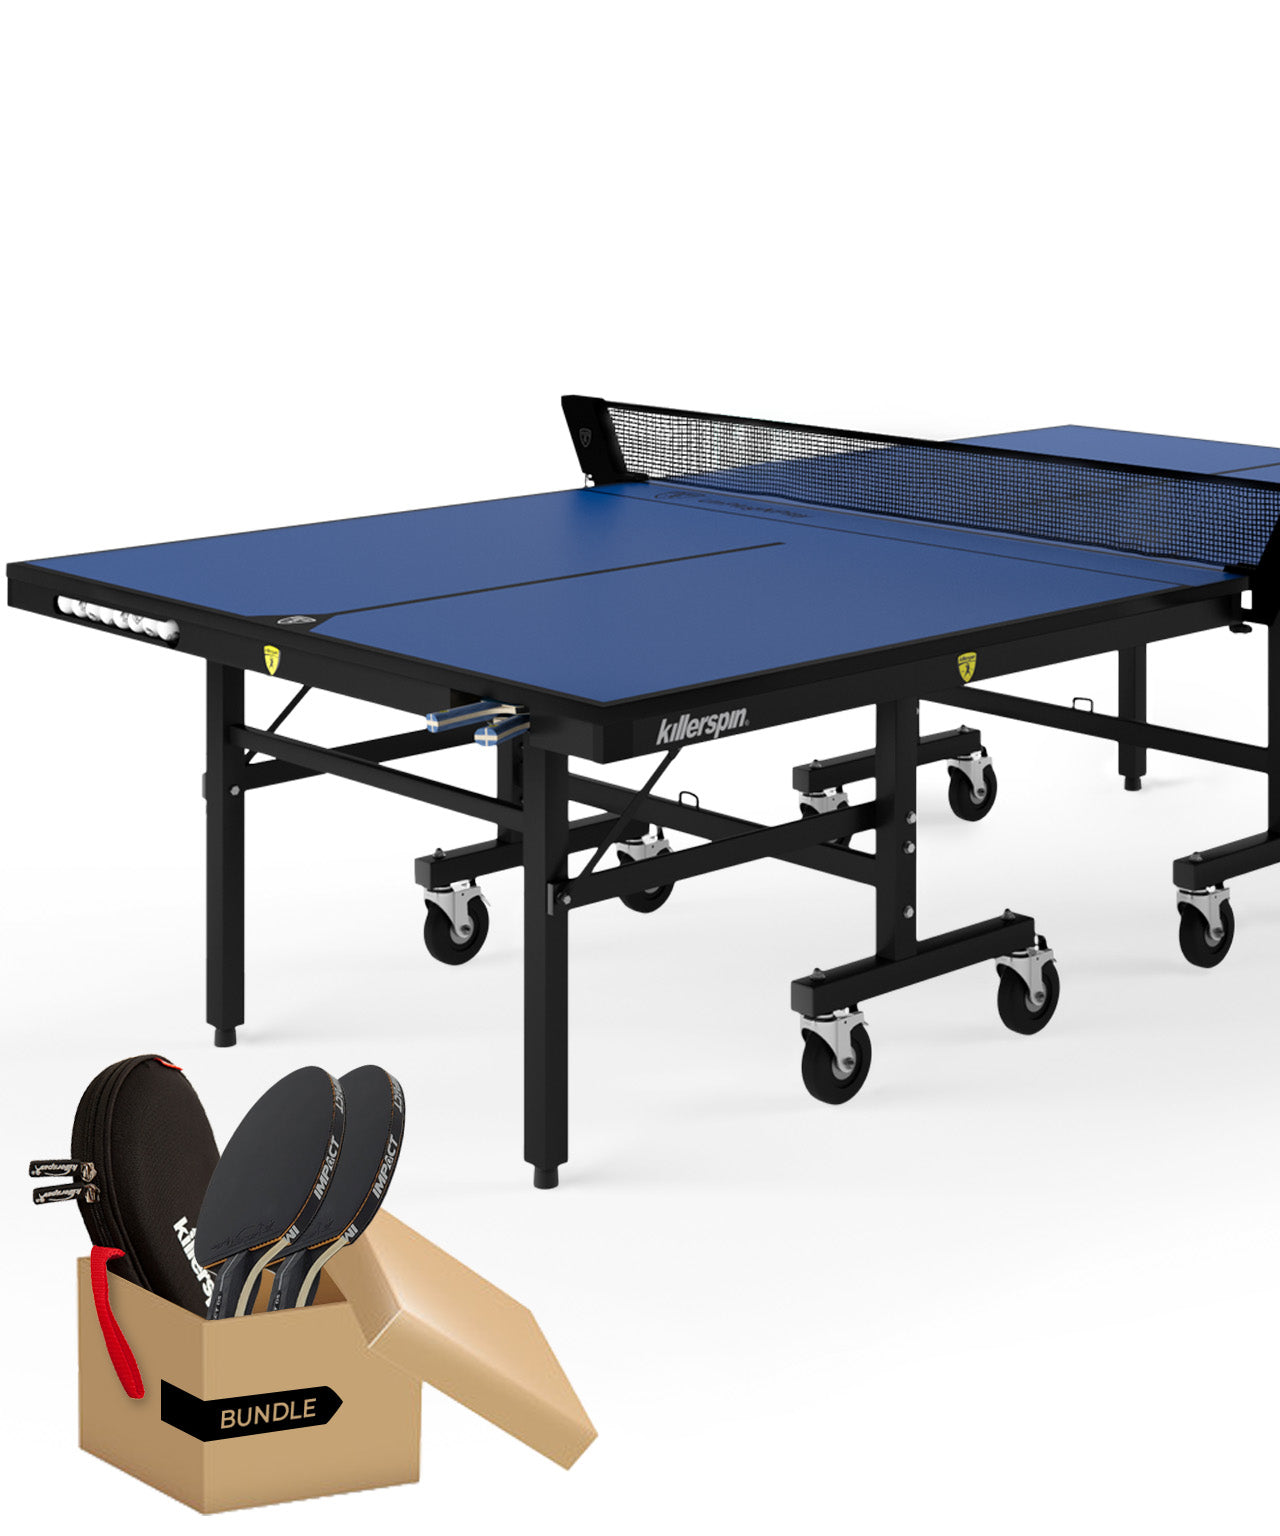 Ping Pong 3D  Table Tennis - Apps on Google Play